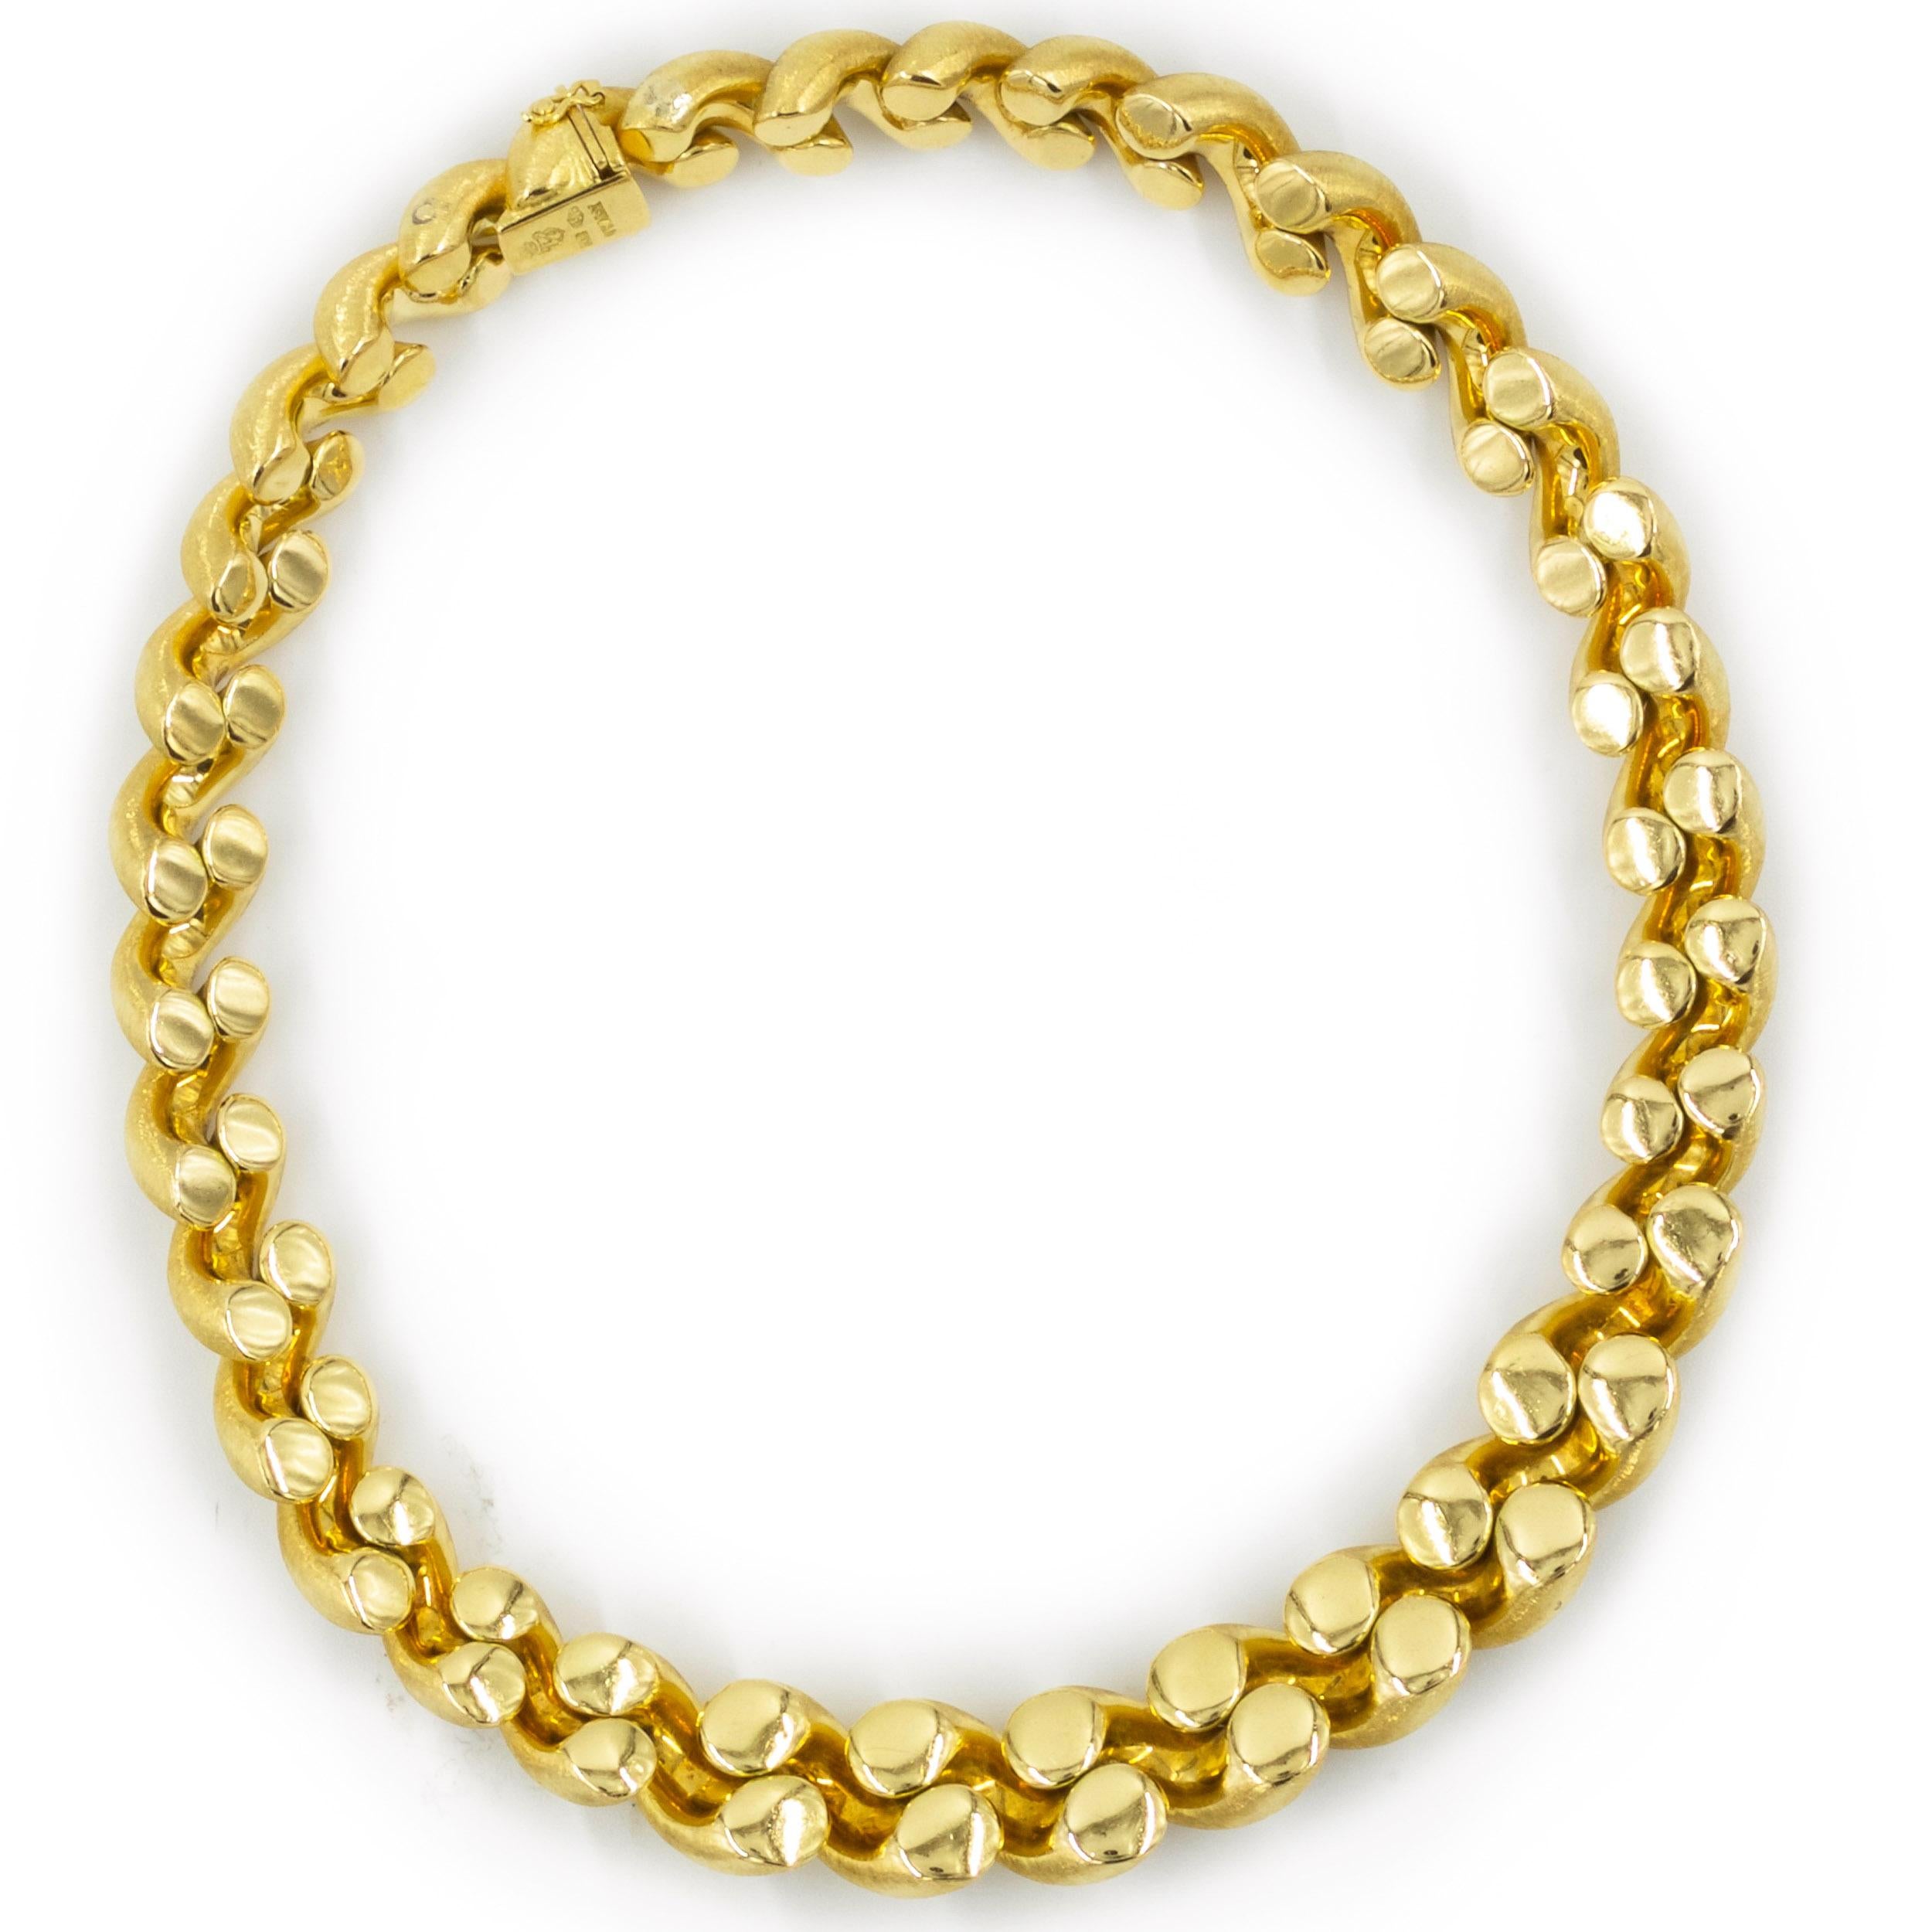 Vintage 18k Gold Florentine Finish San Marco Choker Necklace by Weingrill 3